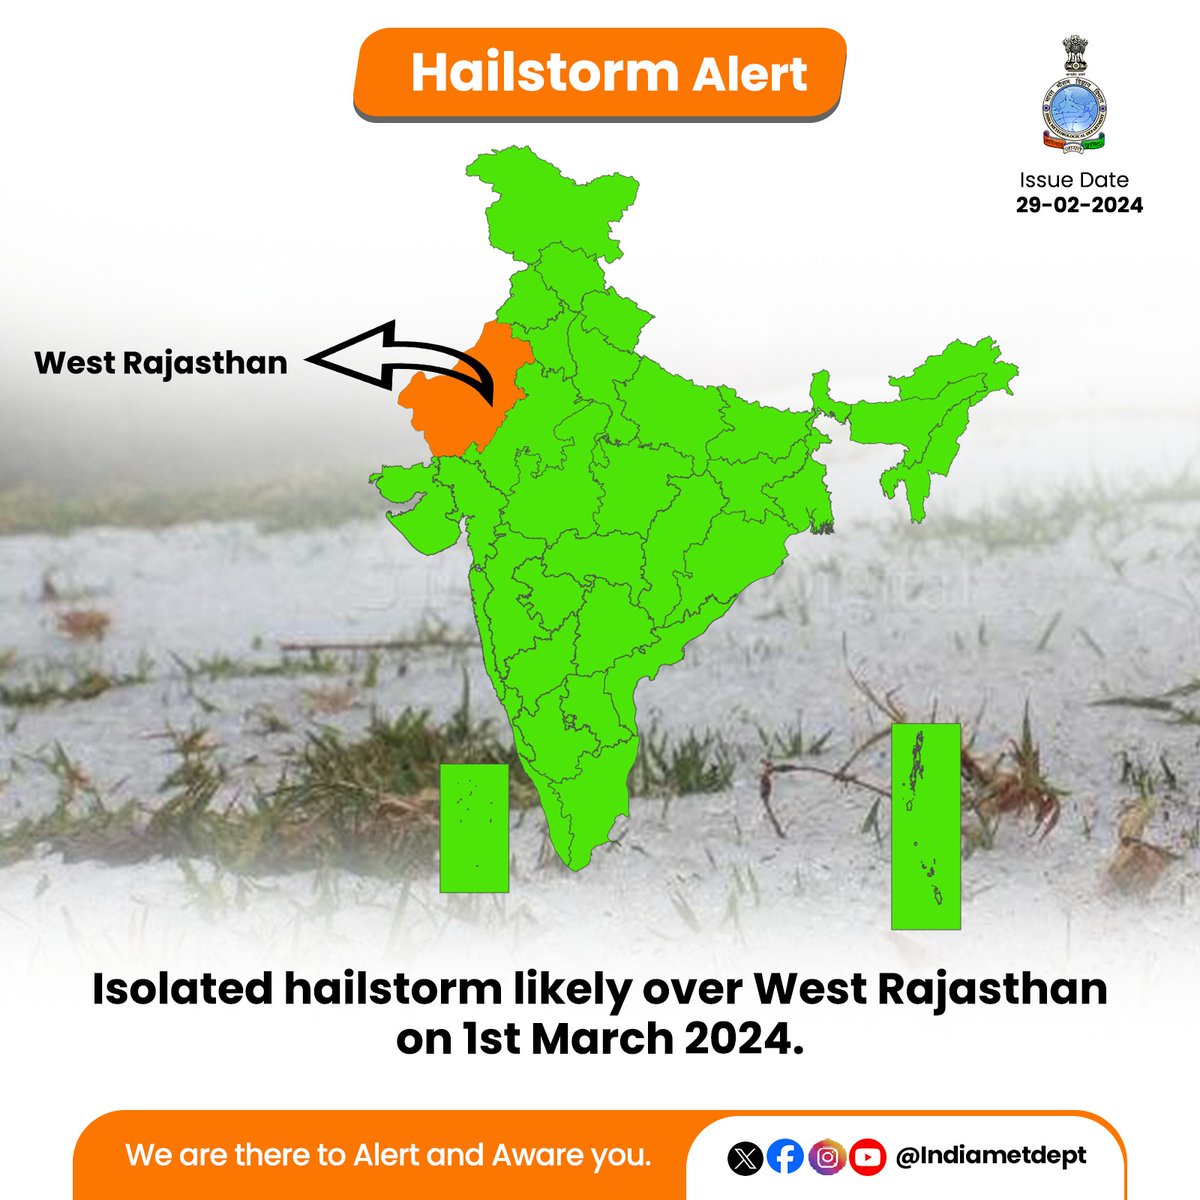 Isolated hailstorm likely over West Rajasthan on 1st March 2024.

#RajasthanWeather #HailstormAlert 

@moesgoi
@DDNewslive
@ndmaindia
@airnewsalerts